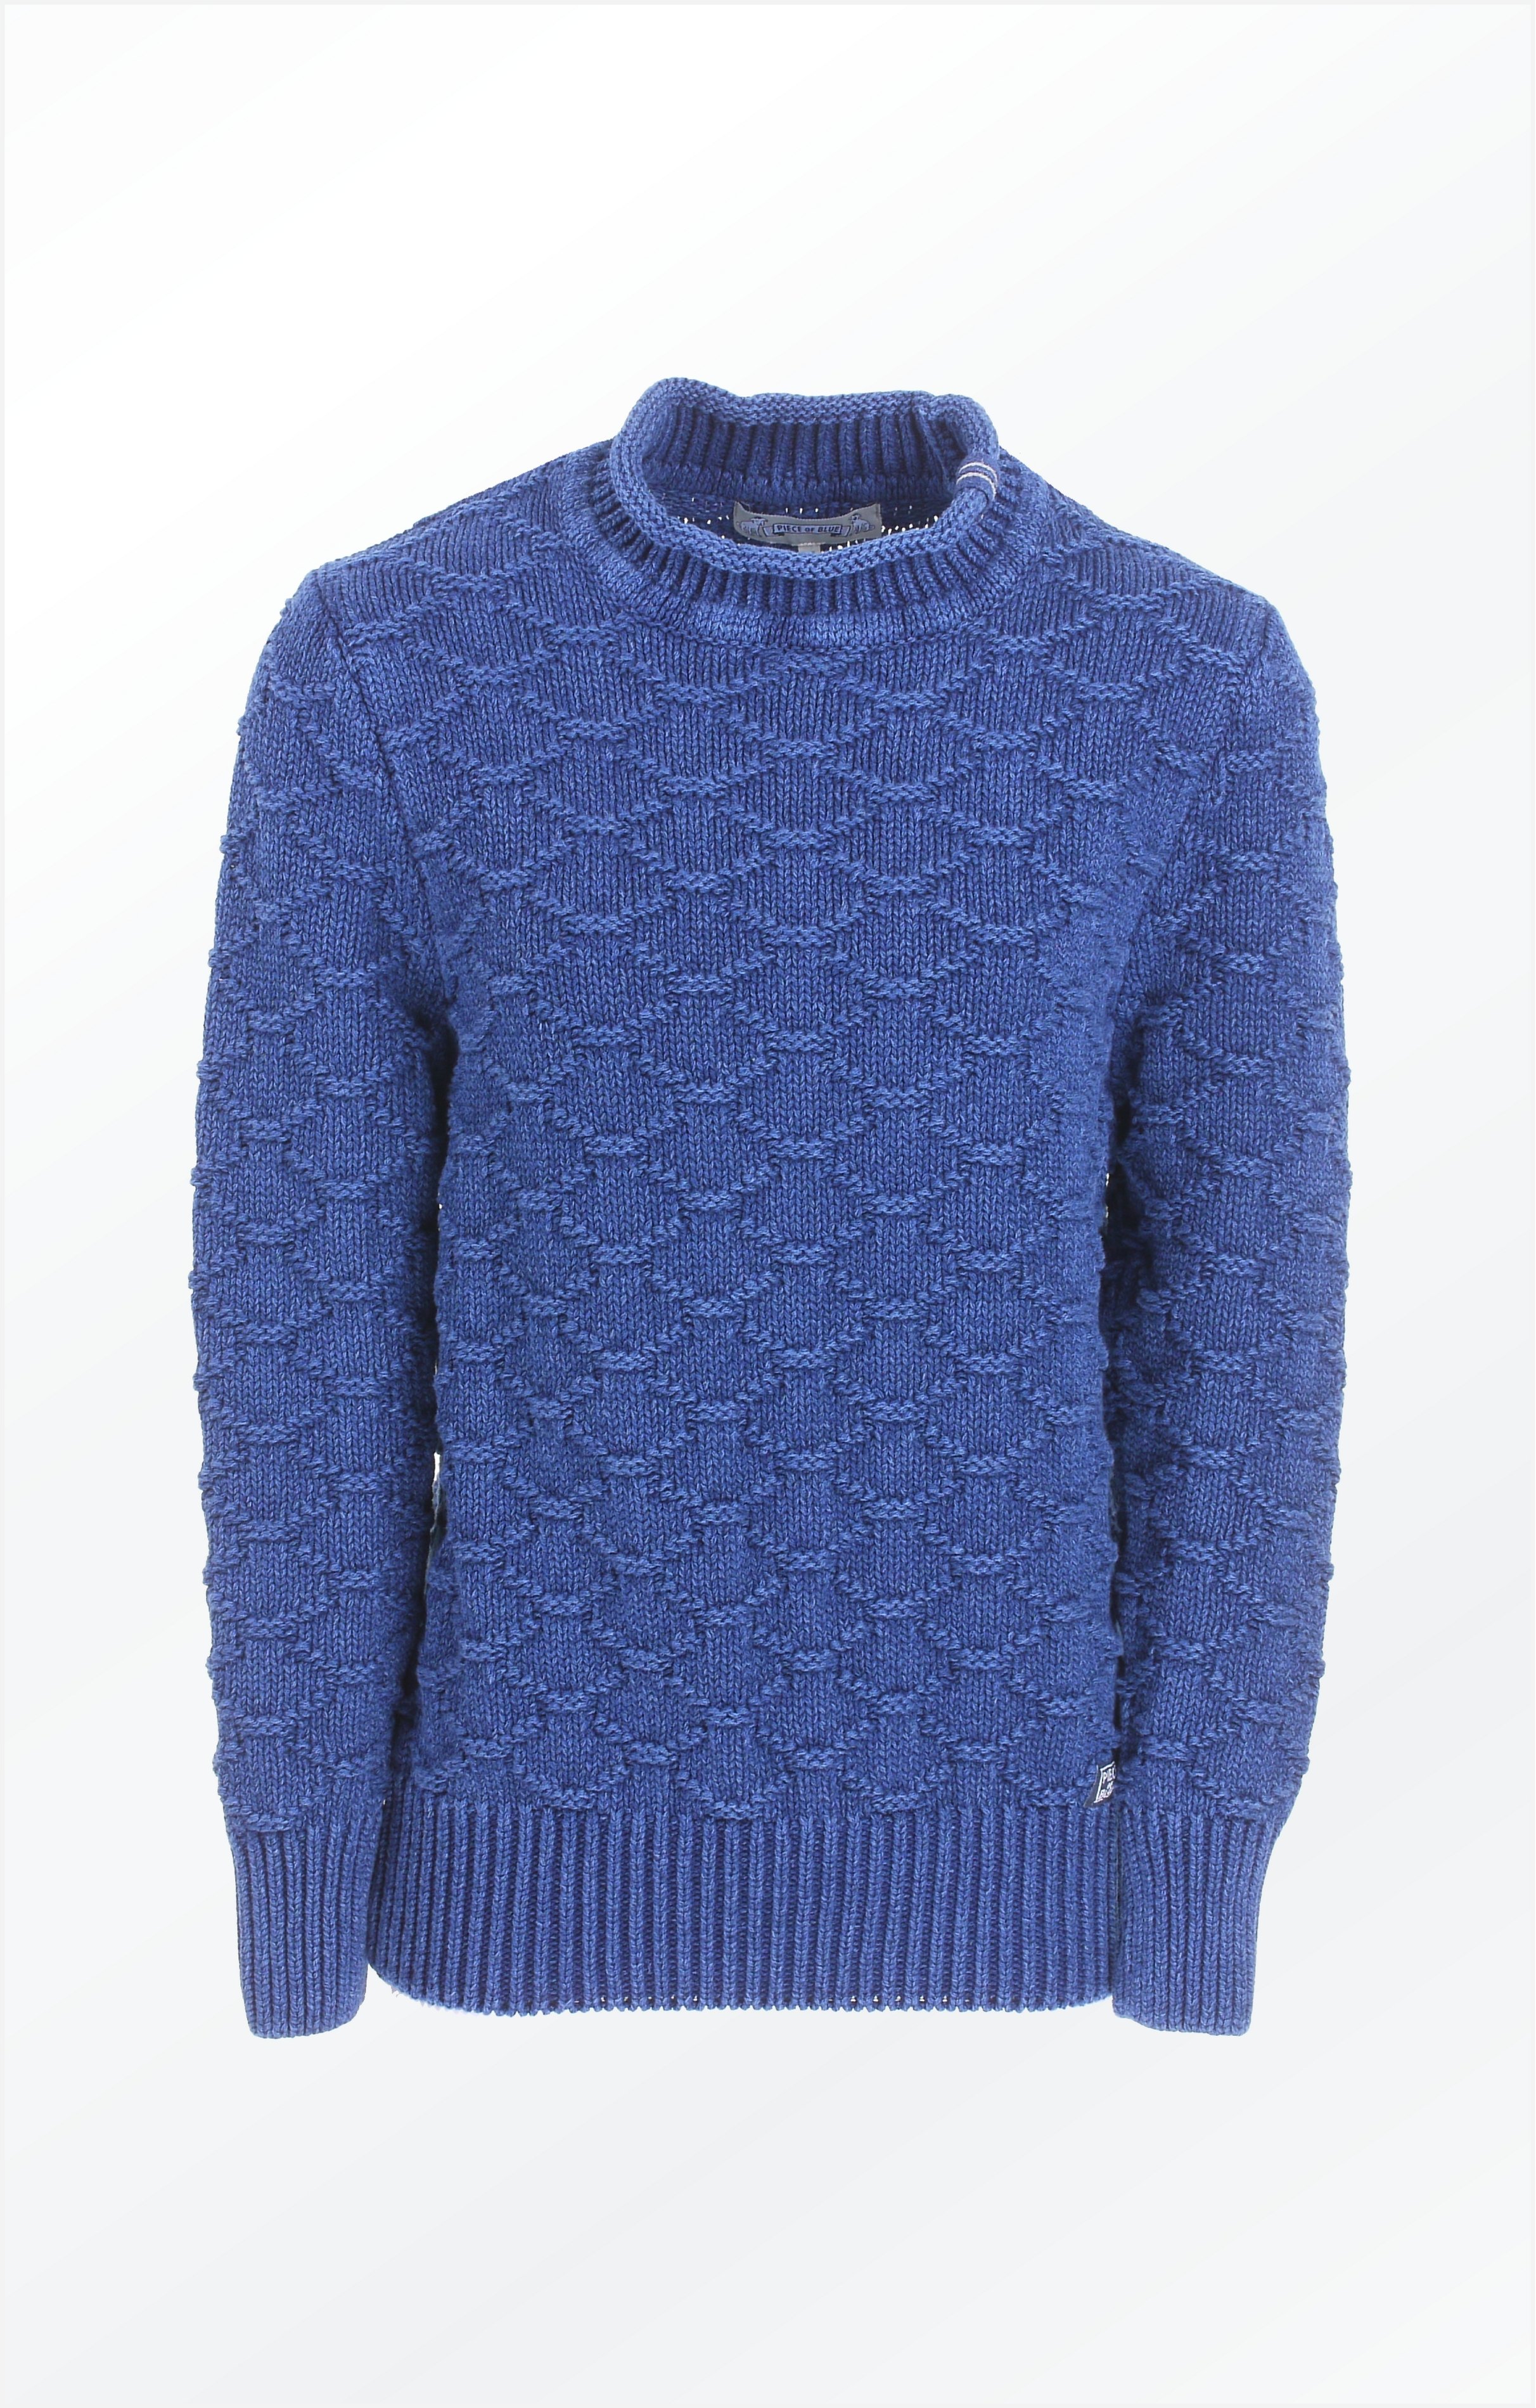 YUMMY AND COZY HEAVY KNITTED PULLOVER - INDIGO BLUE